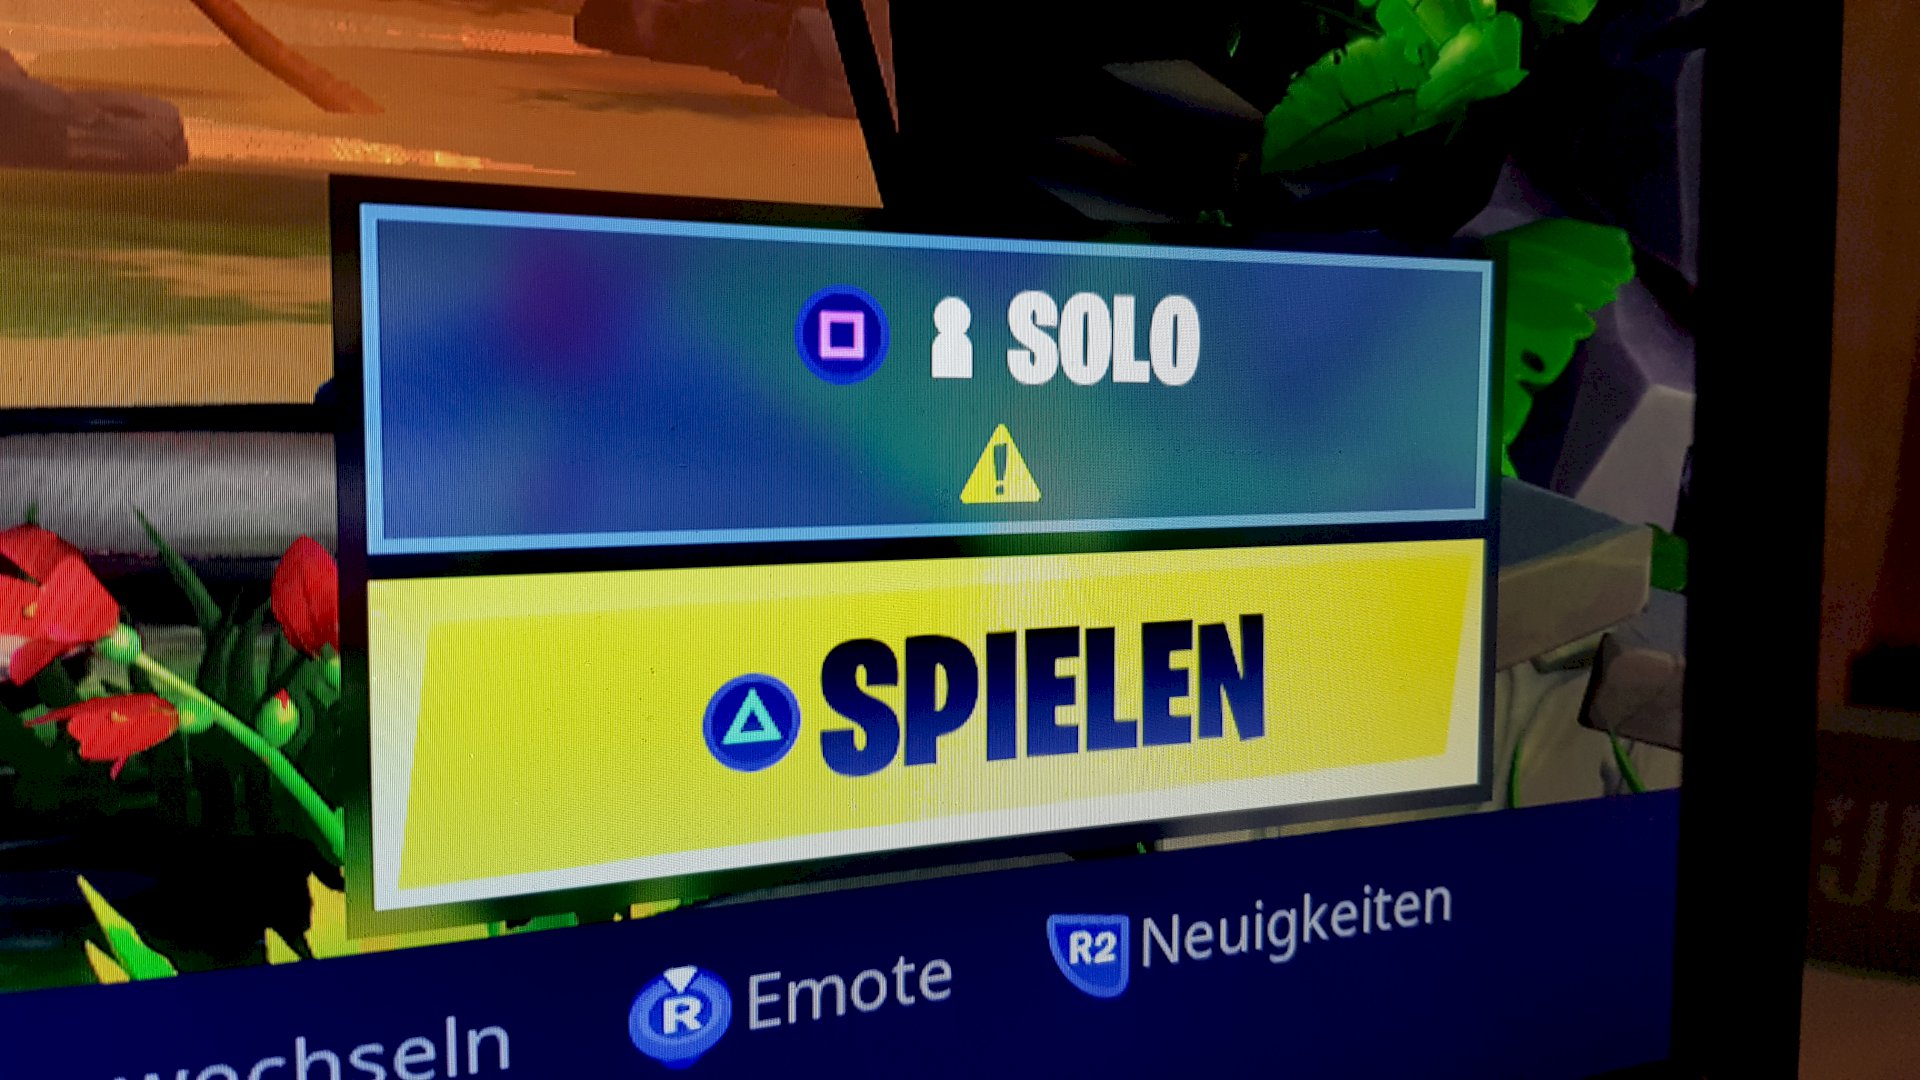 What does the exclamation point mean in Fortnite Solo